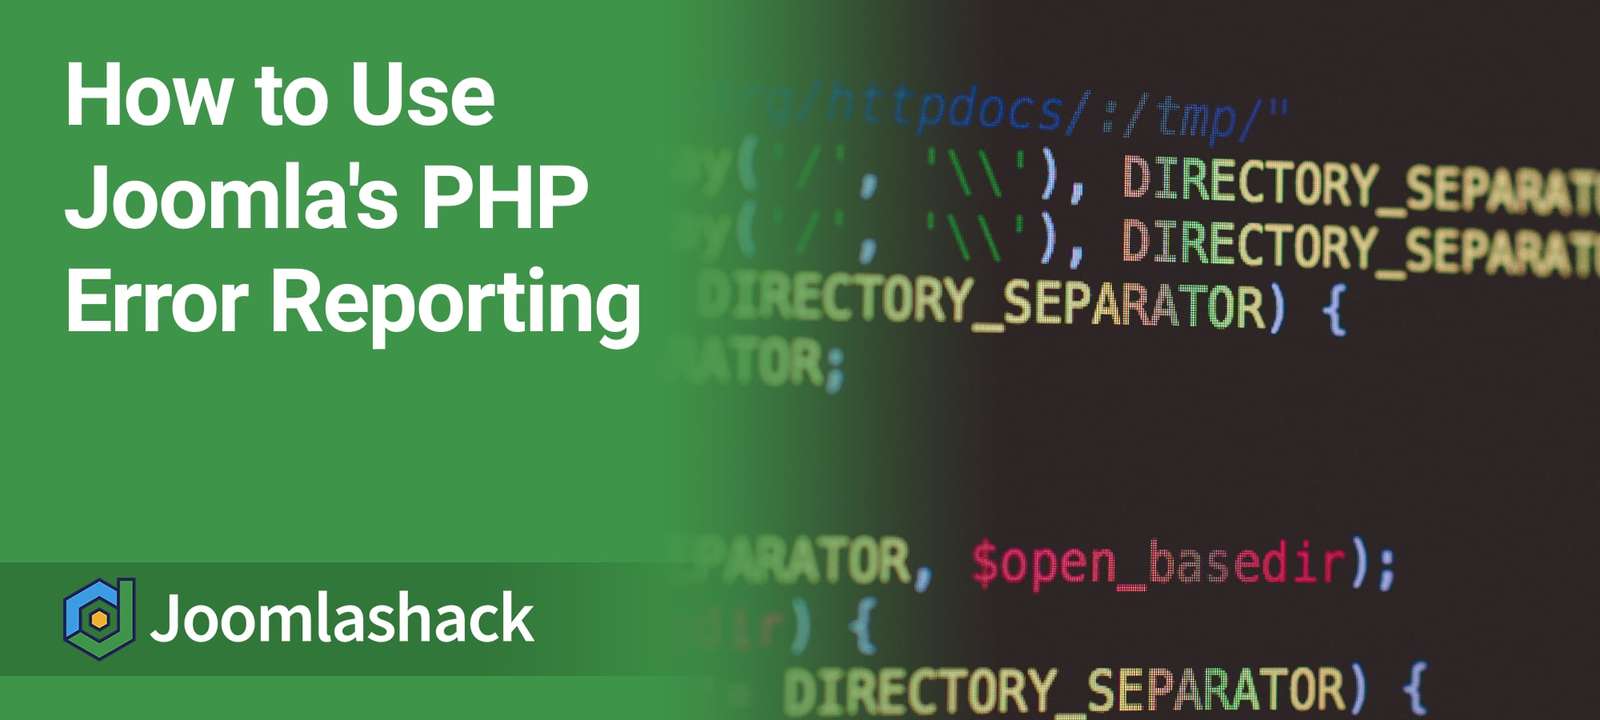 How to Enable Joomla PHP Error Reporting